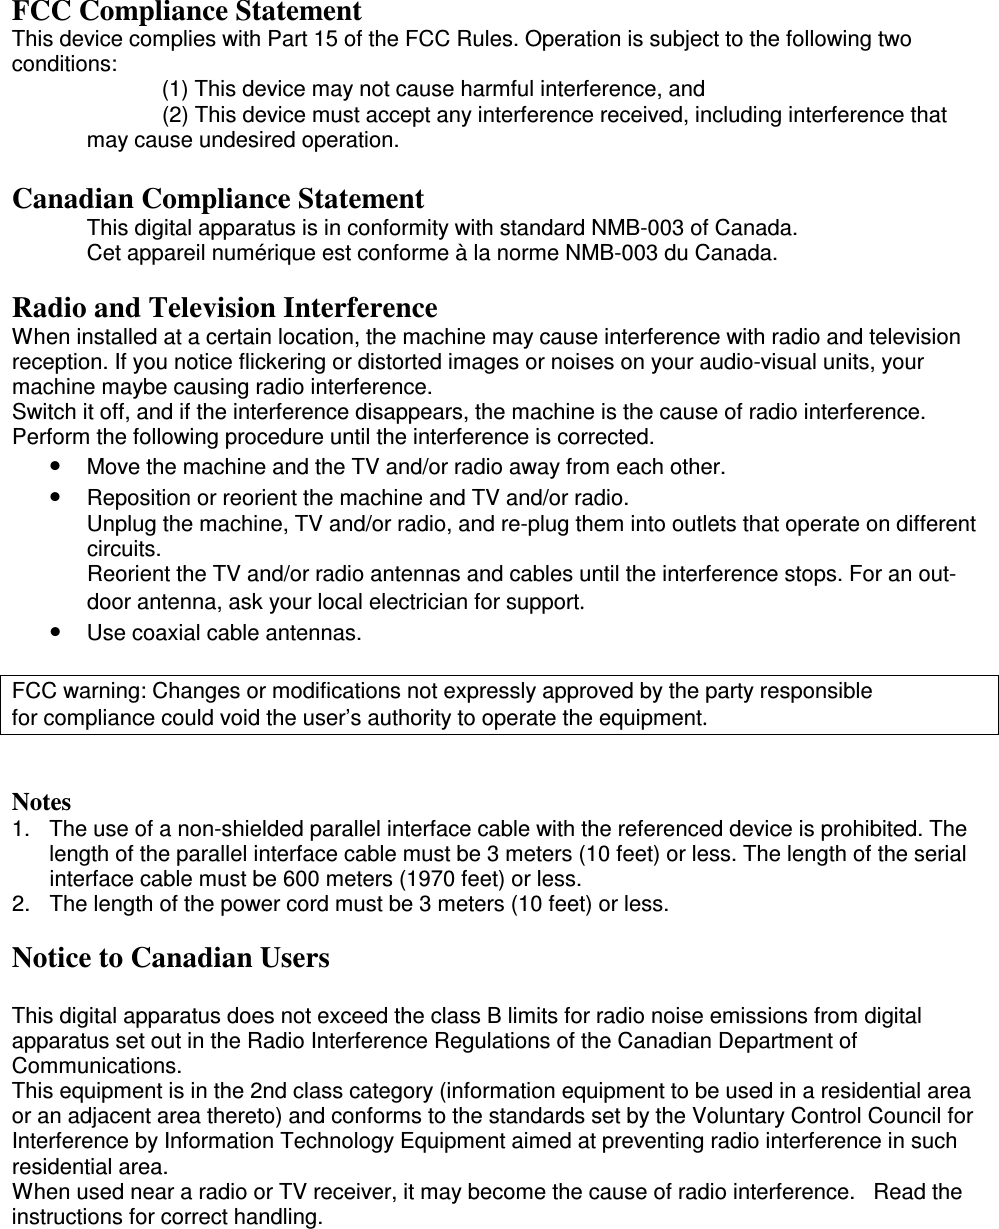 FCC Compliance Statement This device complies with Part 15 of the FCC Rules. Operation is subject to the following two conditions:   (1) This device may not cause harmful interference, and    (2) This device must accept any interference received, including interference that may cause undesired operation.  Canadian Compliance Statement  This digital apparatus is in conformity with standard NMB-003 of Canada.   Cet appareil numérique est conforme à la norme NMB-003 du Canada.  Radio and Television Interference When installed at a certain location, the machine may cause interference with radio and television reception. If you notice flickering or distorted images or noises on your audio-visual units, your machine maybe causing radio interference. Switch it off, and if the interference disappears, the machine is the cause of radio interference. Perform the following procedure until the interference is corrected. •  Move the machine and the TV and/or radio away from each other. •  Reposition or reorient the machine and TV and/or radio. Unplug the machine, TV and/or radio, and re-plug them into outlets that operate on different circuits. Reorient the TV and/or radio antennas and cables until the interference stops. For an out-door antenna, ask your local electrician for support. •  Use coaxial cable antennas.  FCC warning: Changes or modifications not expressly approved by the party responsible                for compliance could void the user’s authority to operate the equipment.   Notes 1. The use of a non-shielded parallel interface cable with the referenced device is prohibited. The length of the parallel interface cable must be 3 meters (10 feet) or less. The length of the serial interface cable must be 600 meters (1970 feet) or less. 2.  The length of the power cord must be 3 meters (10 feet) or less.  Notice to Canadian Users  This digital apparatus does not exceed the class B limits for radio noise emissions from digital apparatus set out in the Radio Interference Regulations of the Canadian Department of Communications.  This equipment is in the 2nd class category (information equipment to be used in a residential area or an adjacent area thereto) and conforms to the standards set by the Voluntary Control Council for Interference by Information Technology Equipment aimed at preventing radio interference in such residential area. When used near a radio or TV receiver, it may become the cause of radio interference.   Read the instructions for correct handling.   